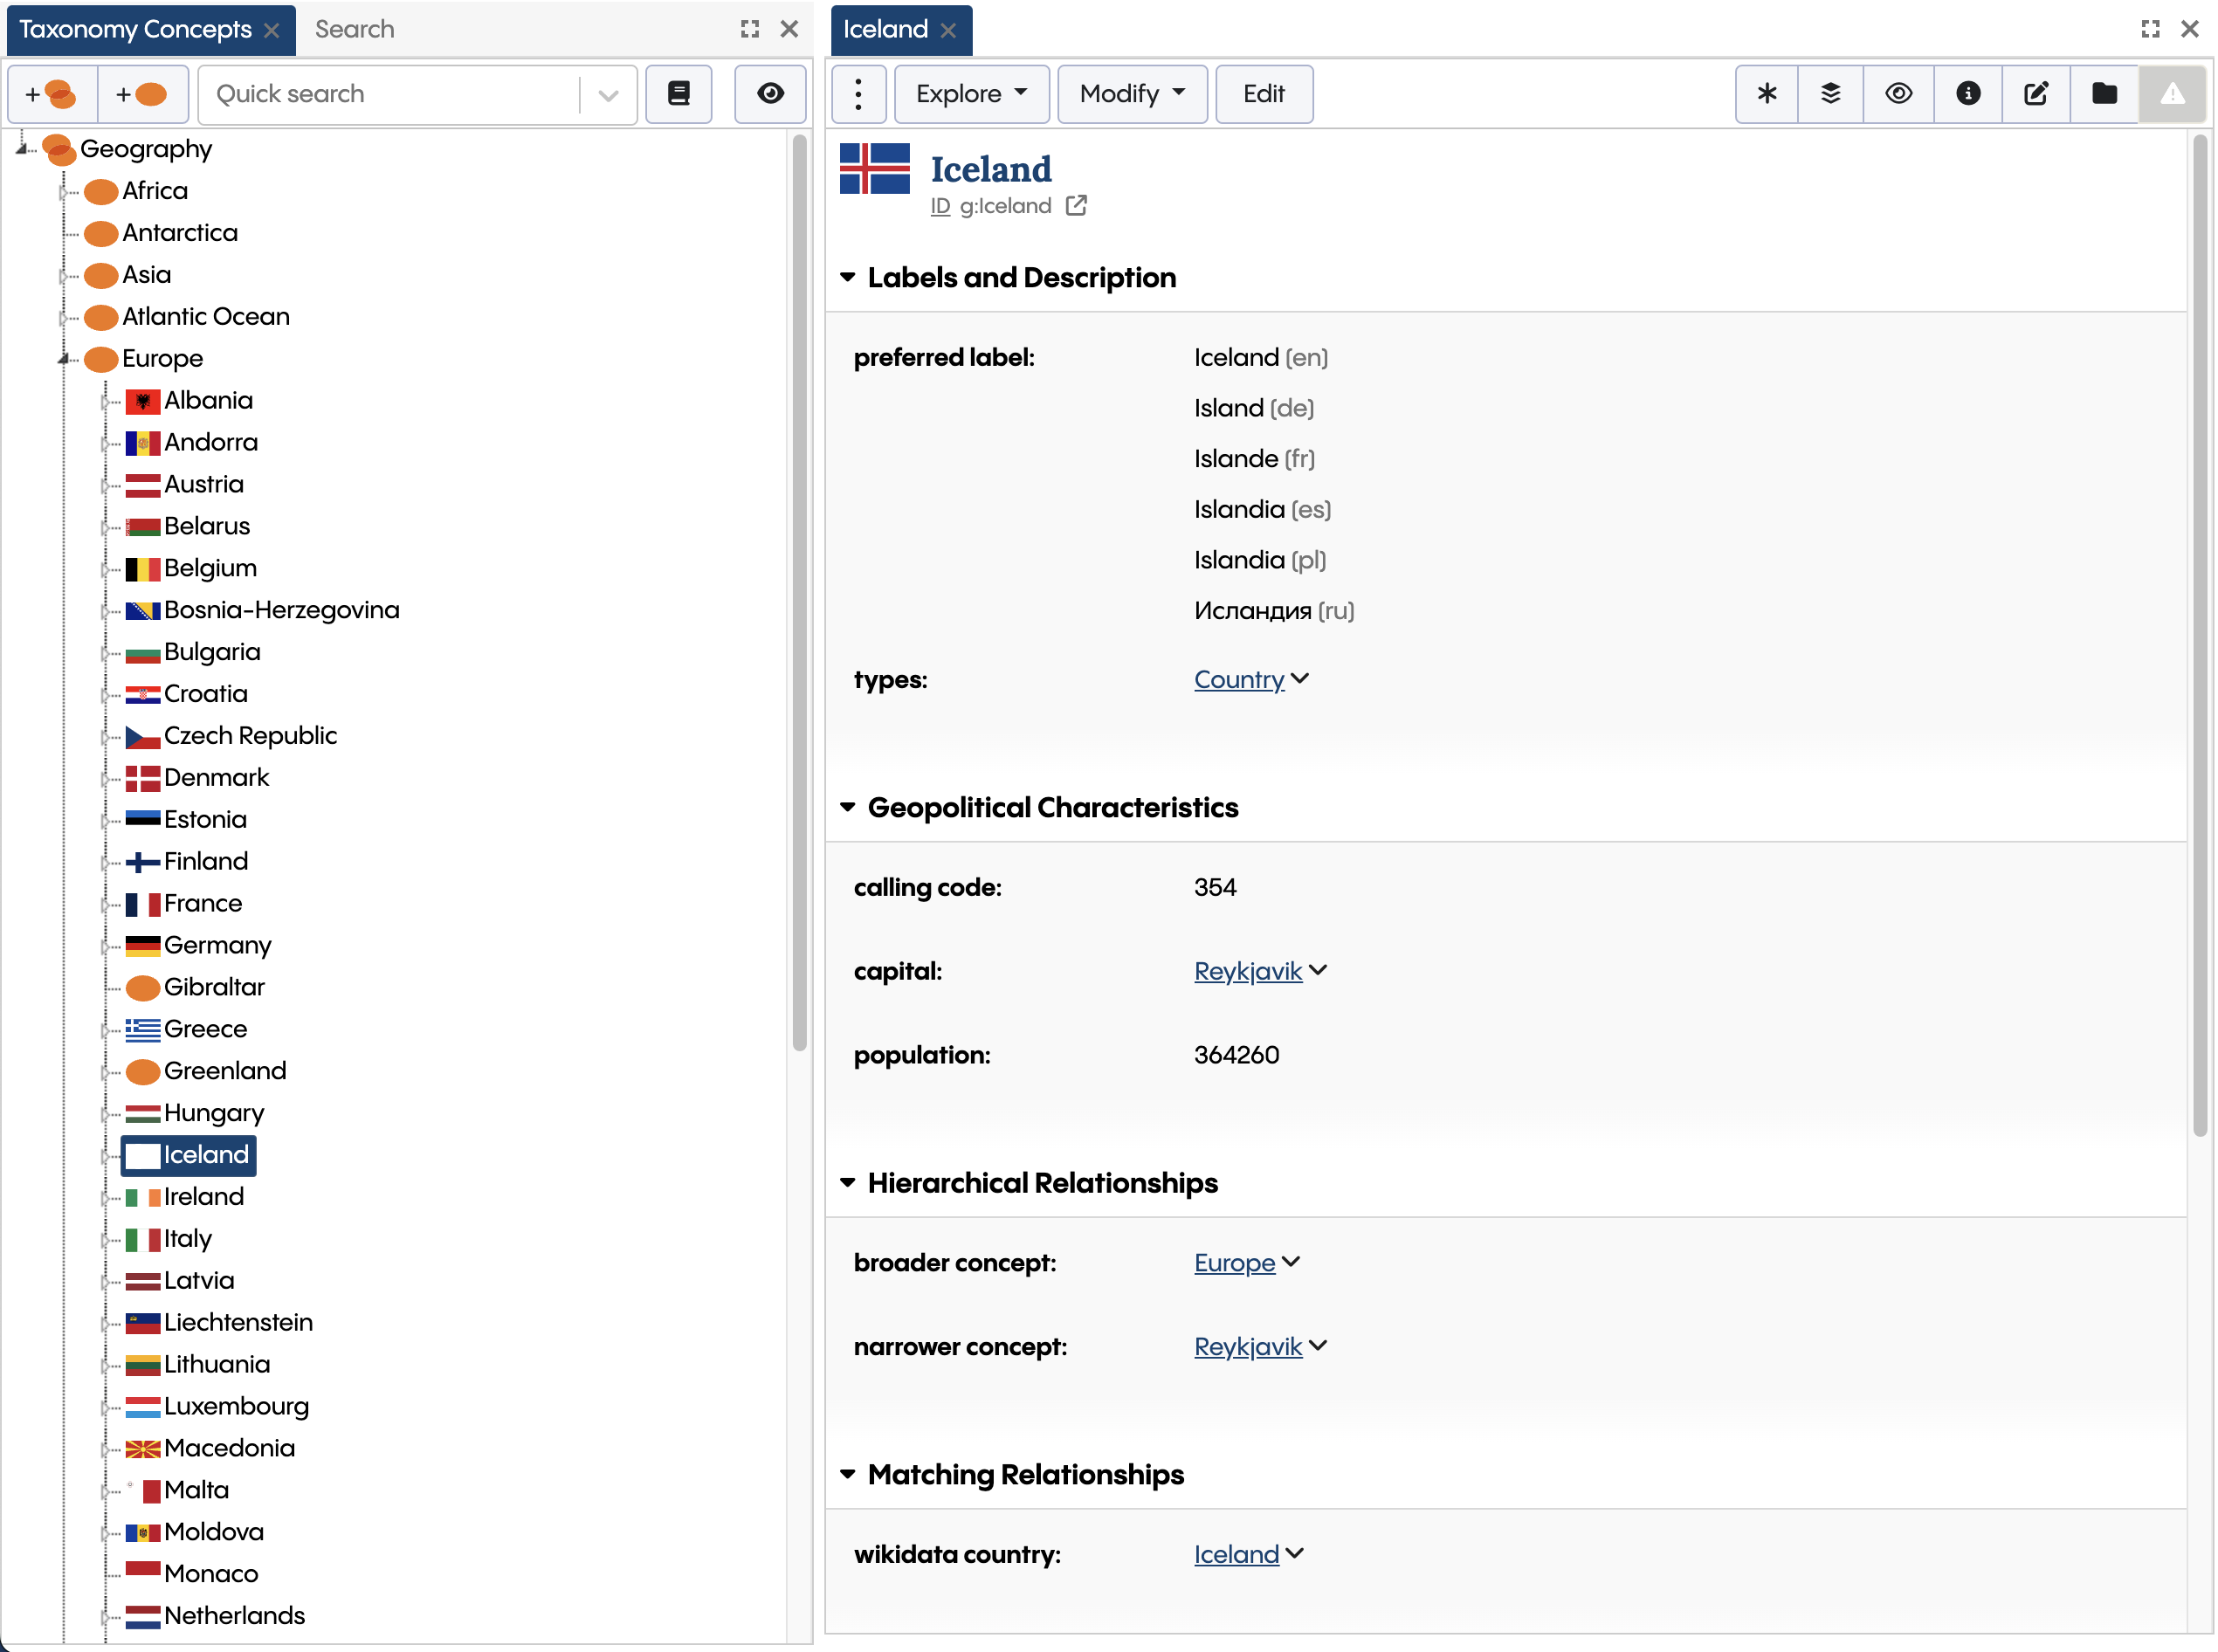 TopBraid EDG screenshot showing the link from the local Iceland asset to its Wikidata twin